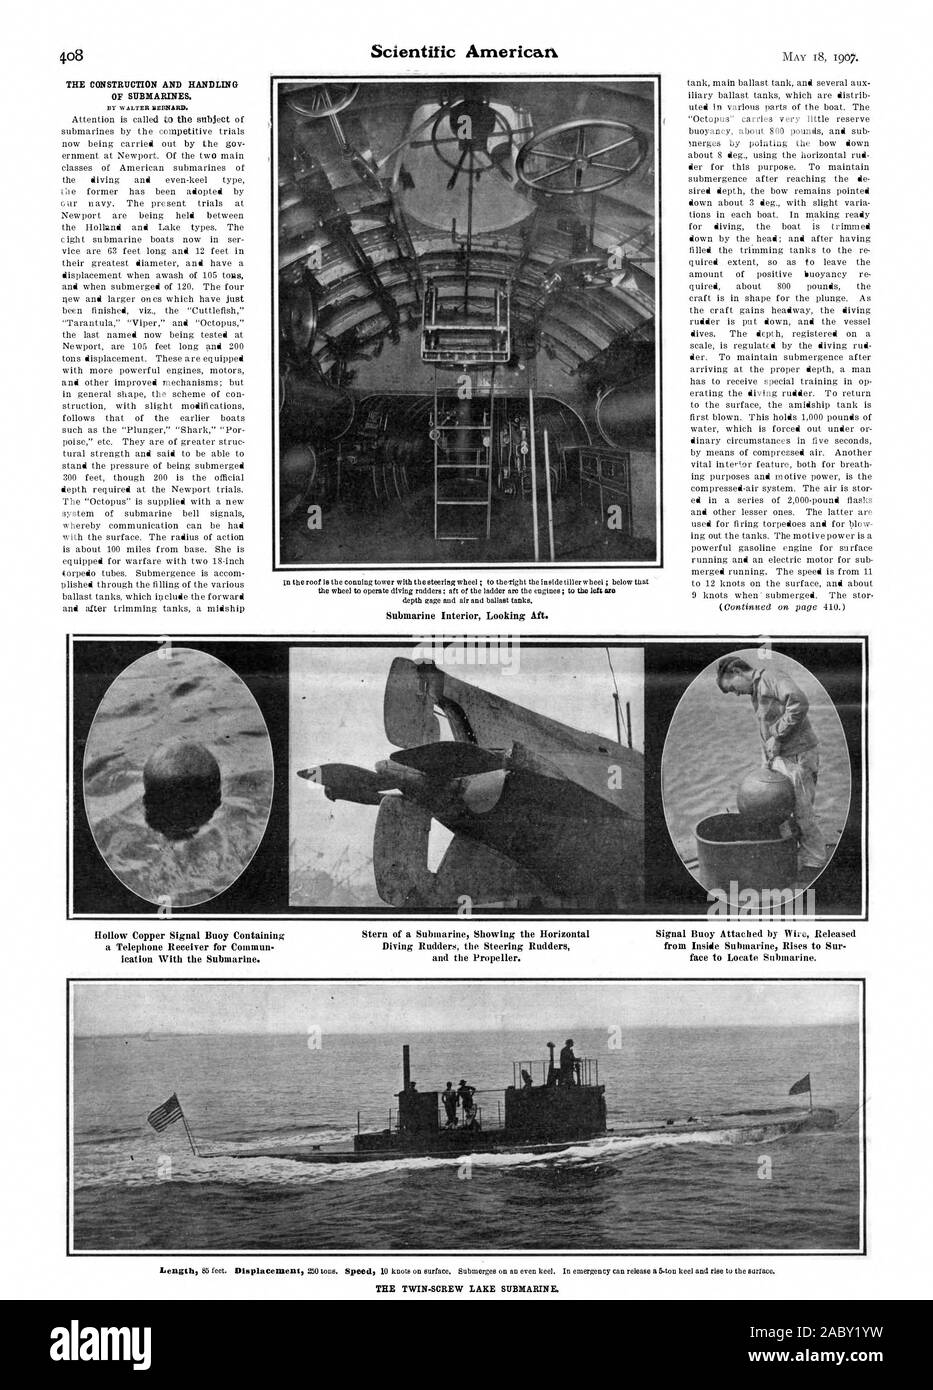 depth gage and air and ballast tanks. Submarine Interior Looking Aft. THE CONSTRUCTION AND HANDLING OF SUBMARINES. Hollow Copper Signal Buoy Containing Stern of a Submarine Showing the Horizontal Signal Buoy Attached by Wire Released ication With the Submarine. and the Propeller. face to Locate Submarine. THE TWIN-SCREW LAKE SUBMARINE., scientific american, 1907-05-18 Stock Photo